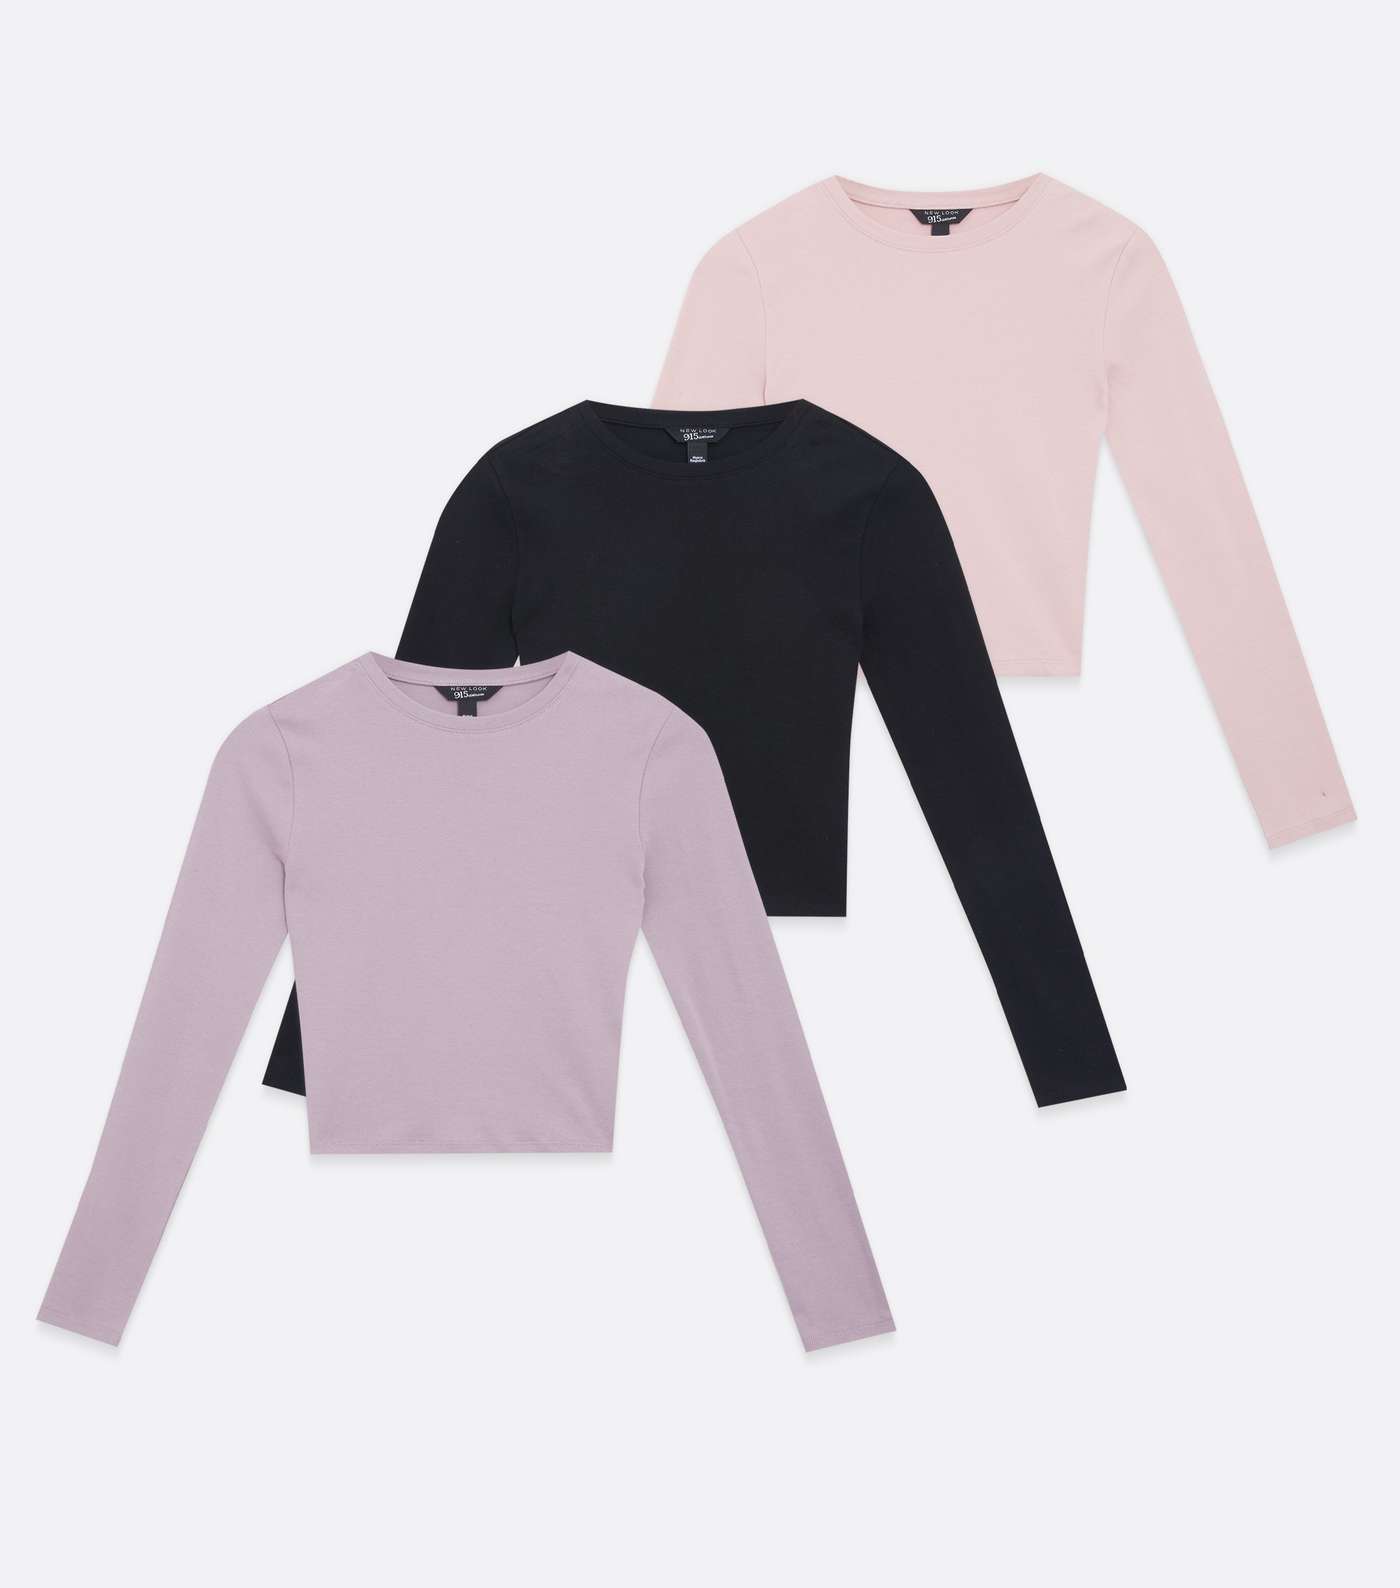 Girls 3 Pack Lilac Black and Pale Pink Long Sleeve Tops Image 5